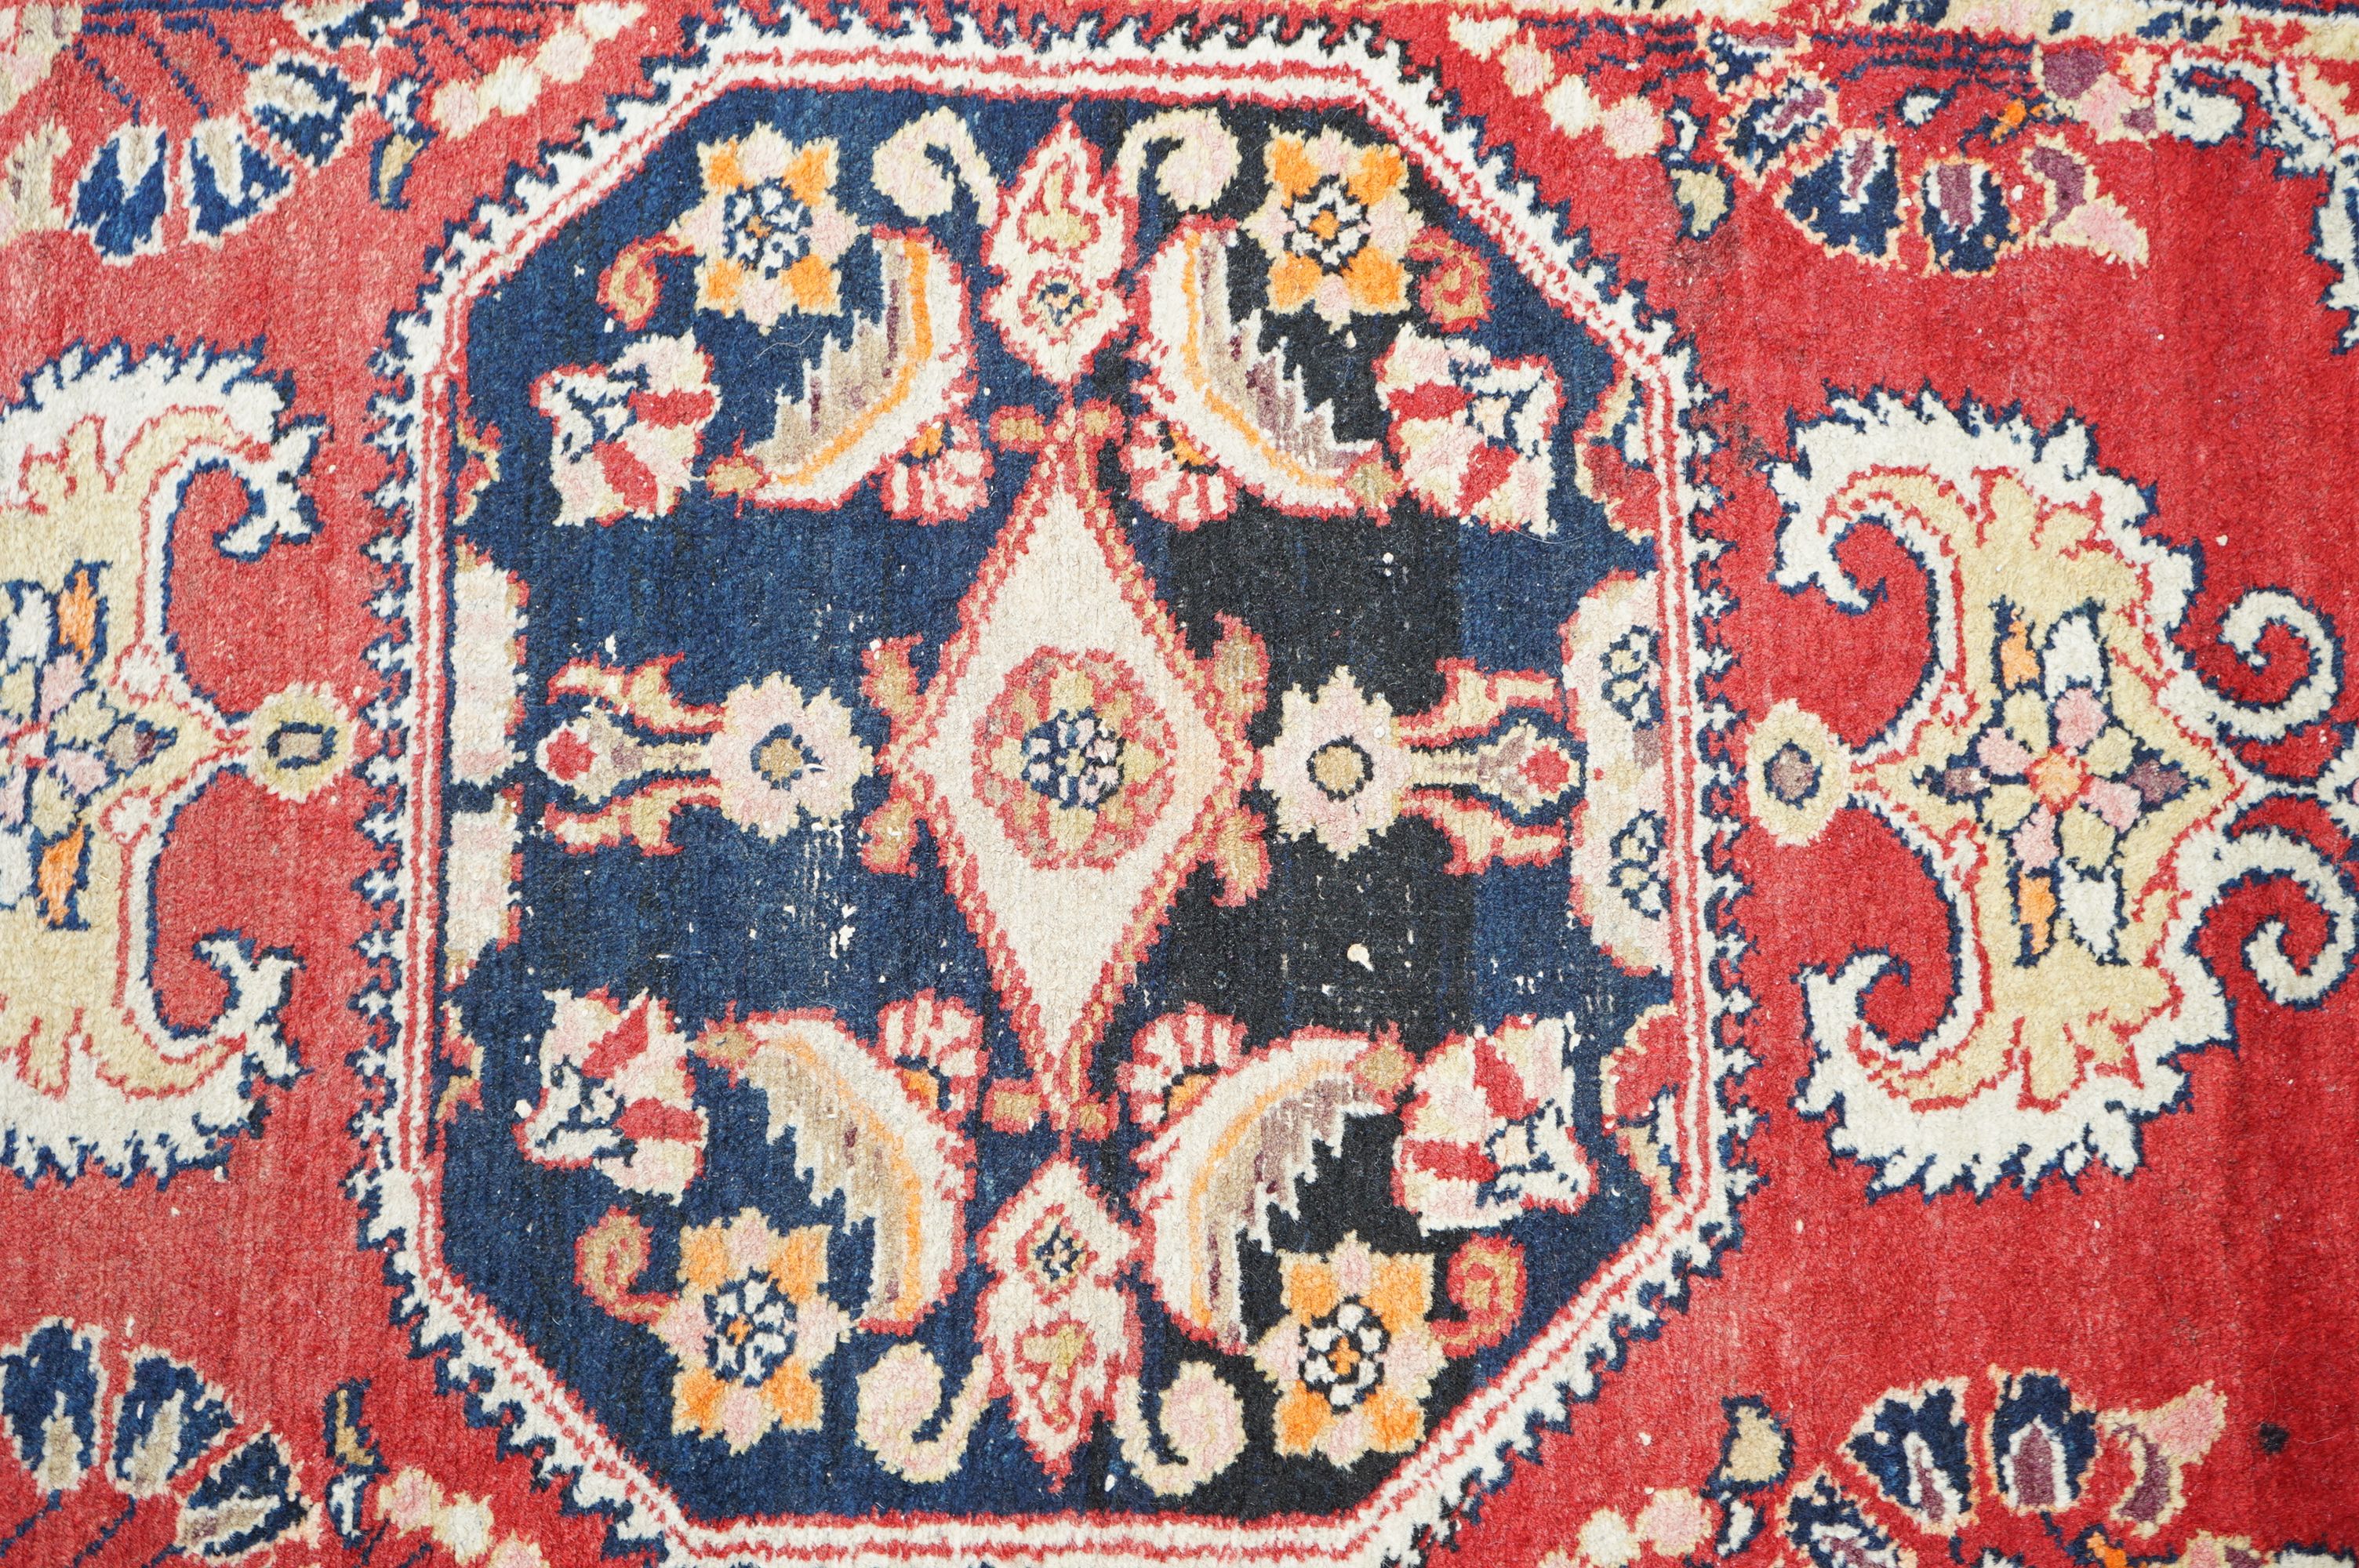 Two small Eastern Wool Rugs 115cm x 70cm and 118cm x 87cm - Image 3 of 15